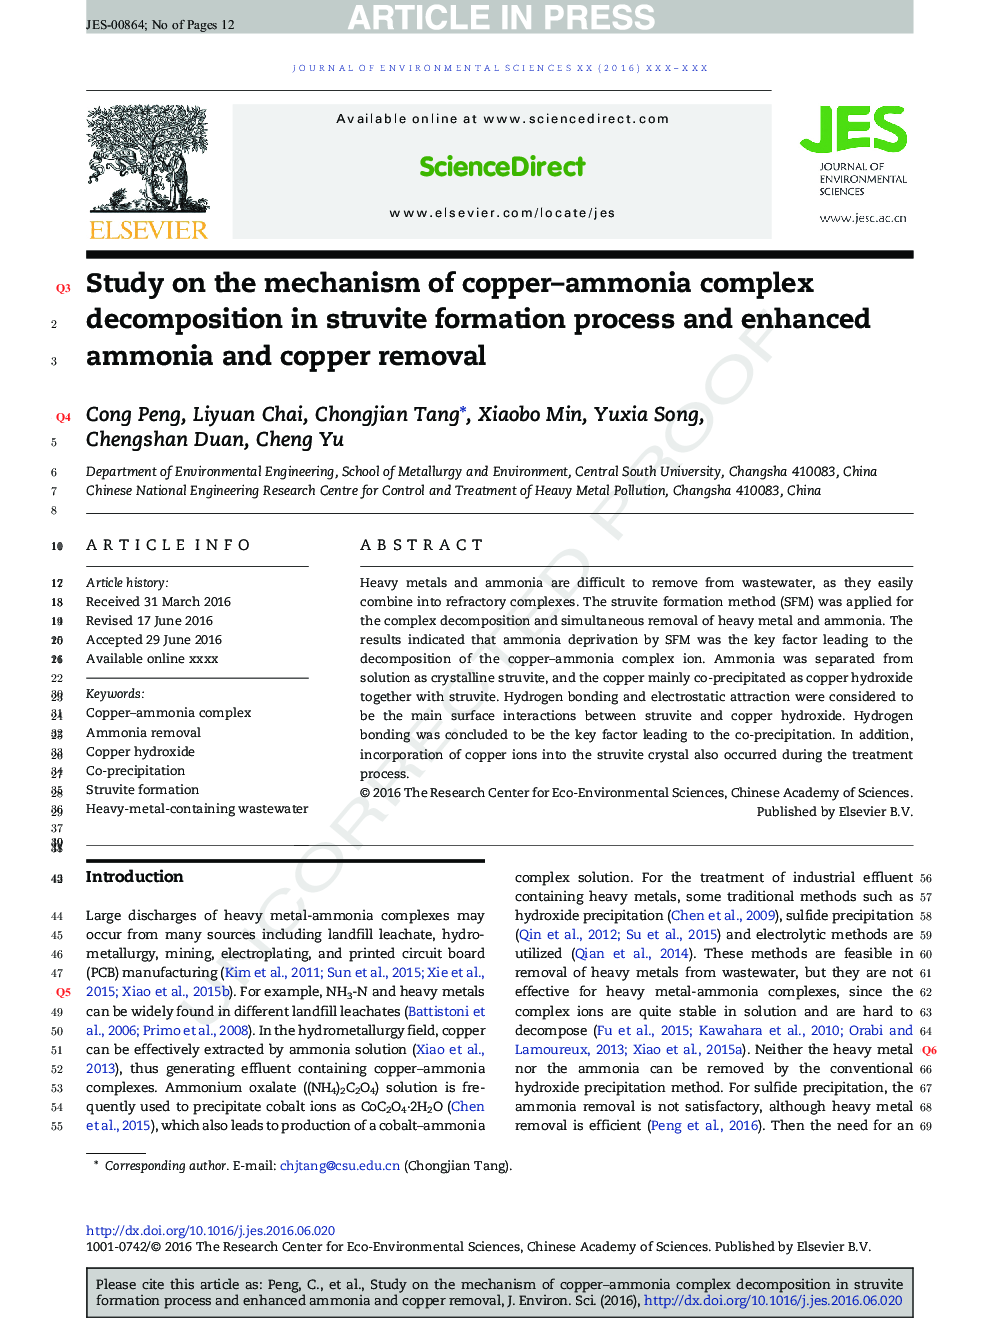 Study on the mechanism of copper-ammonia complex decomposition in struvite formation process and enhanced ammonia and copper removal